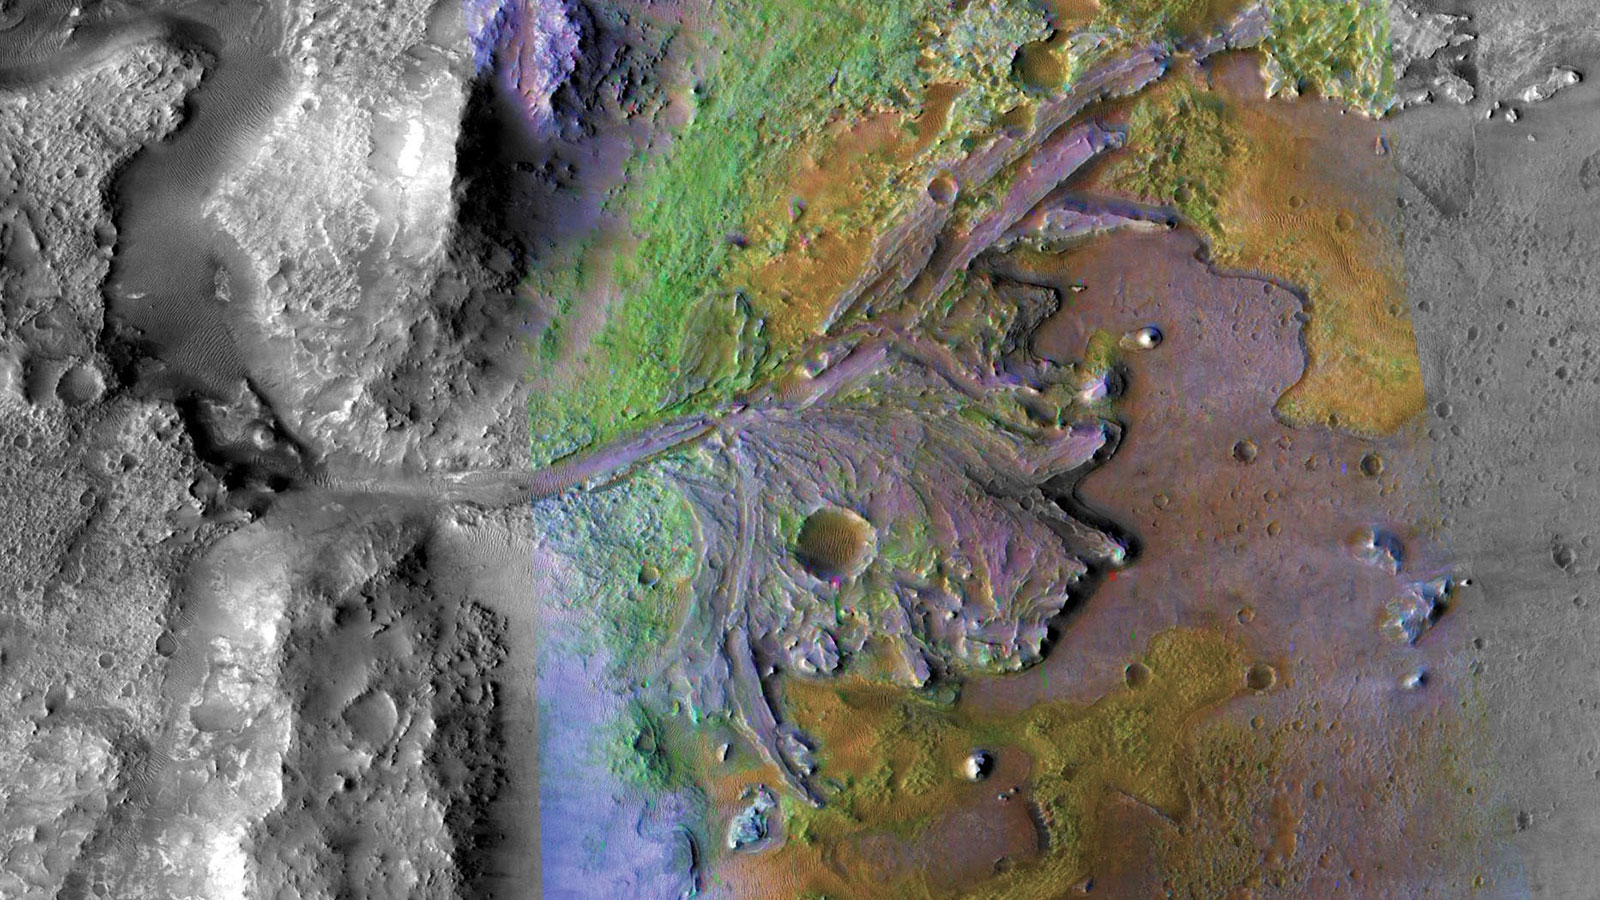 Wata carved channels n' transported sediments form hustlas n' deltas within lake basins up in dis image of Mars' Jezero crater.